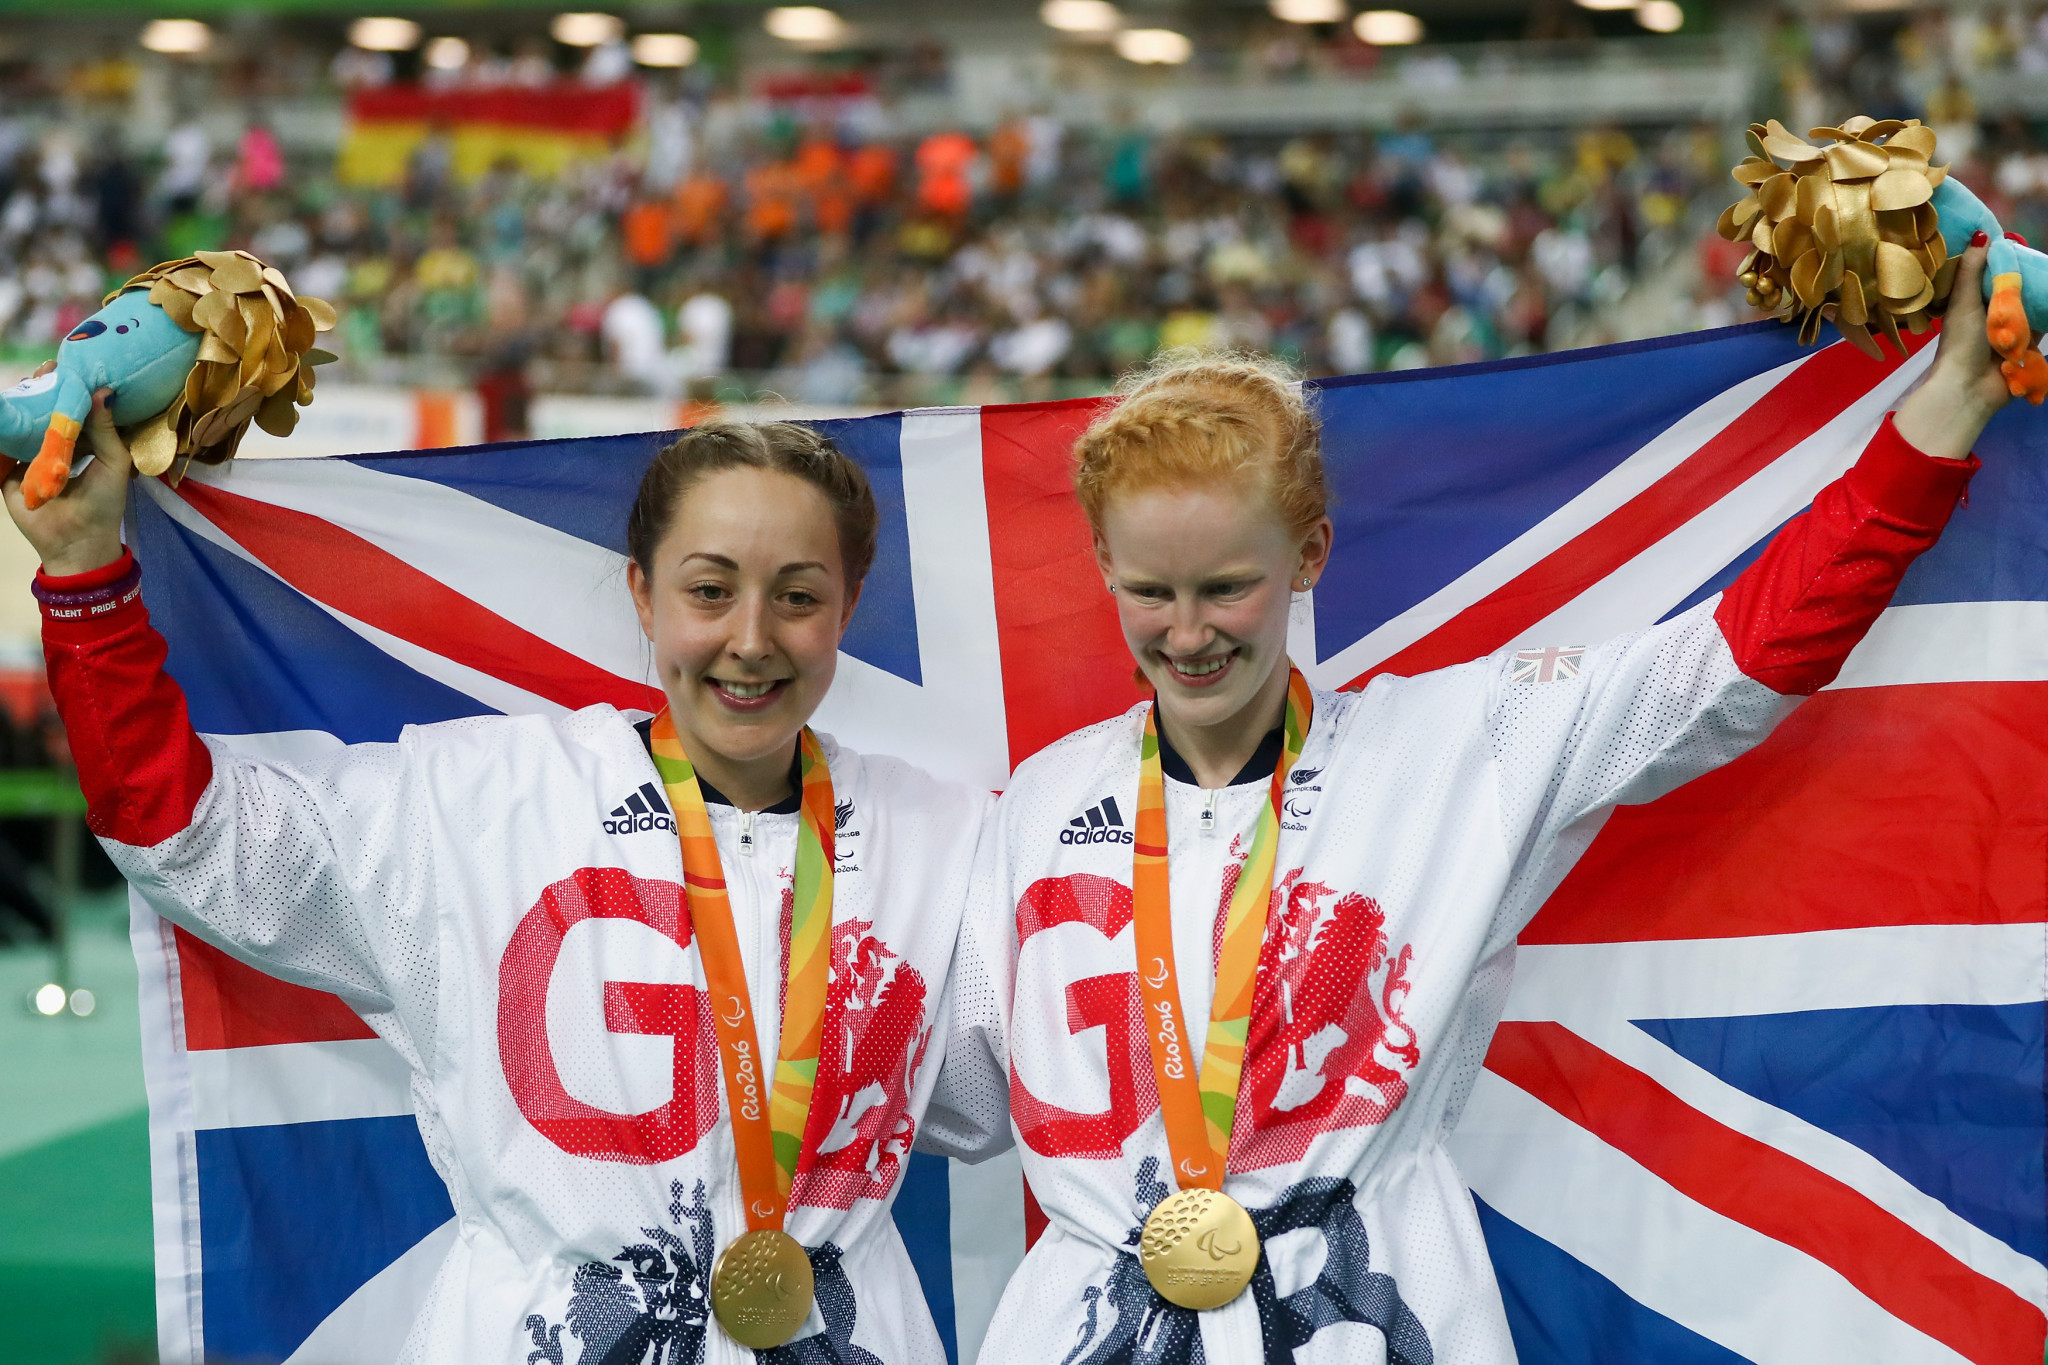 Paralympic champion Thornhill retires after Tokyo 2020 postponement